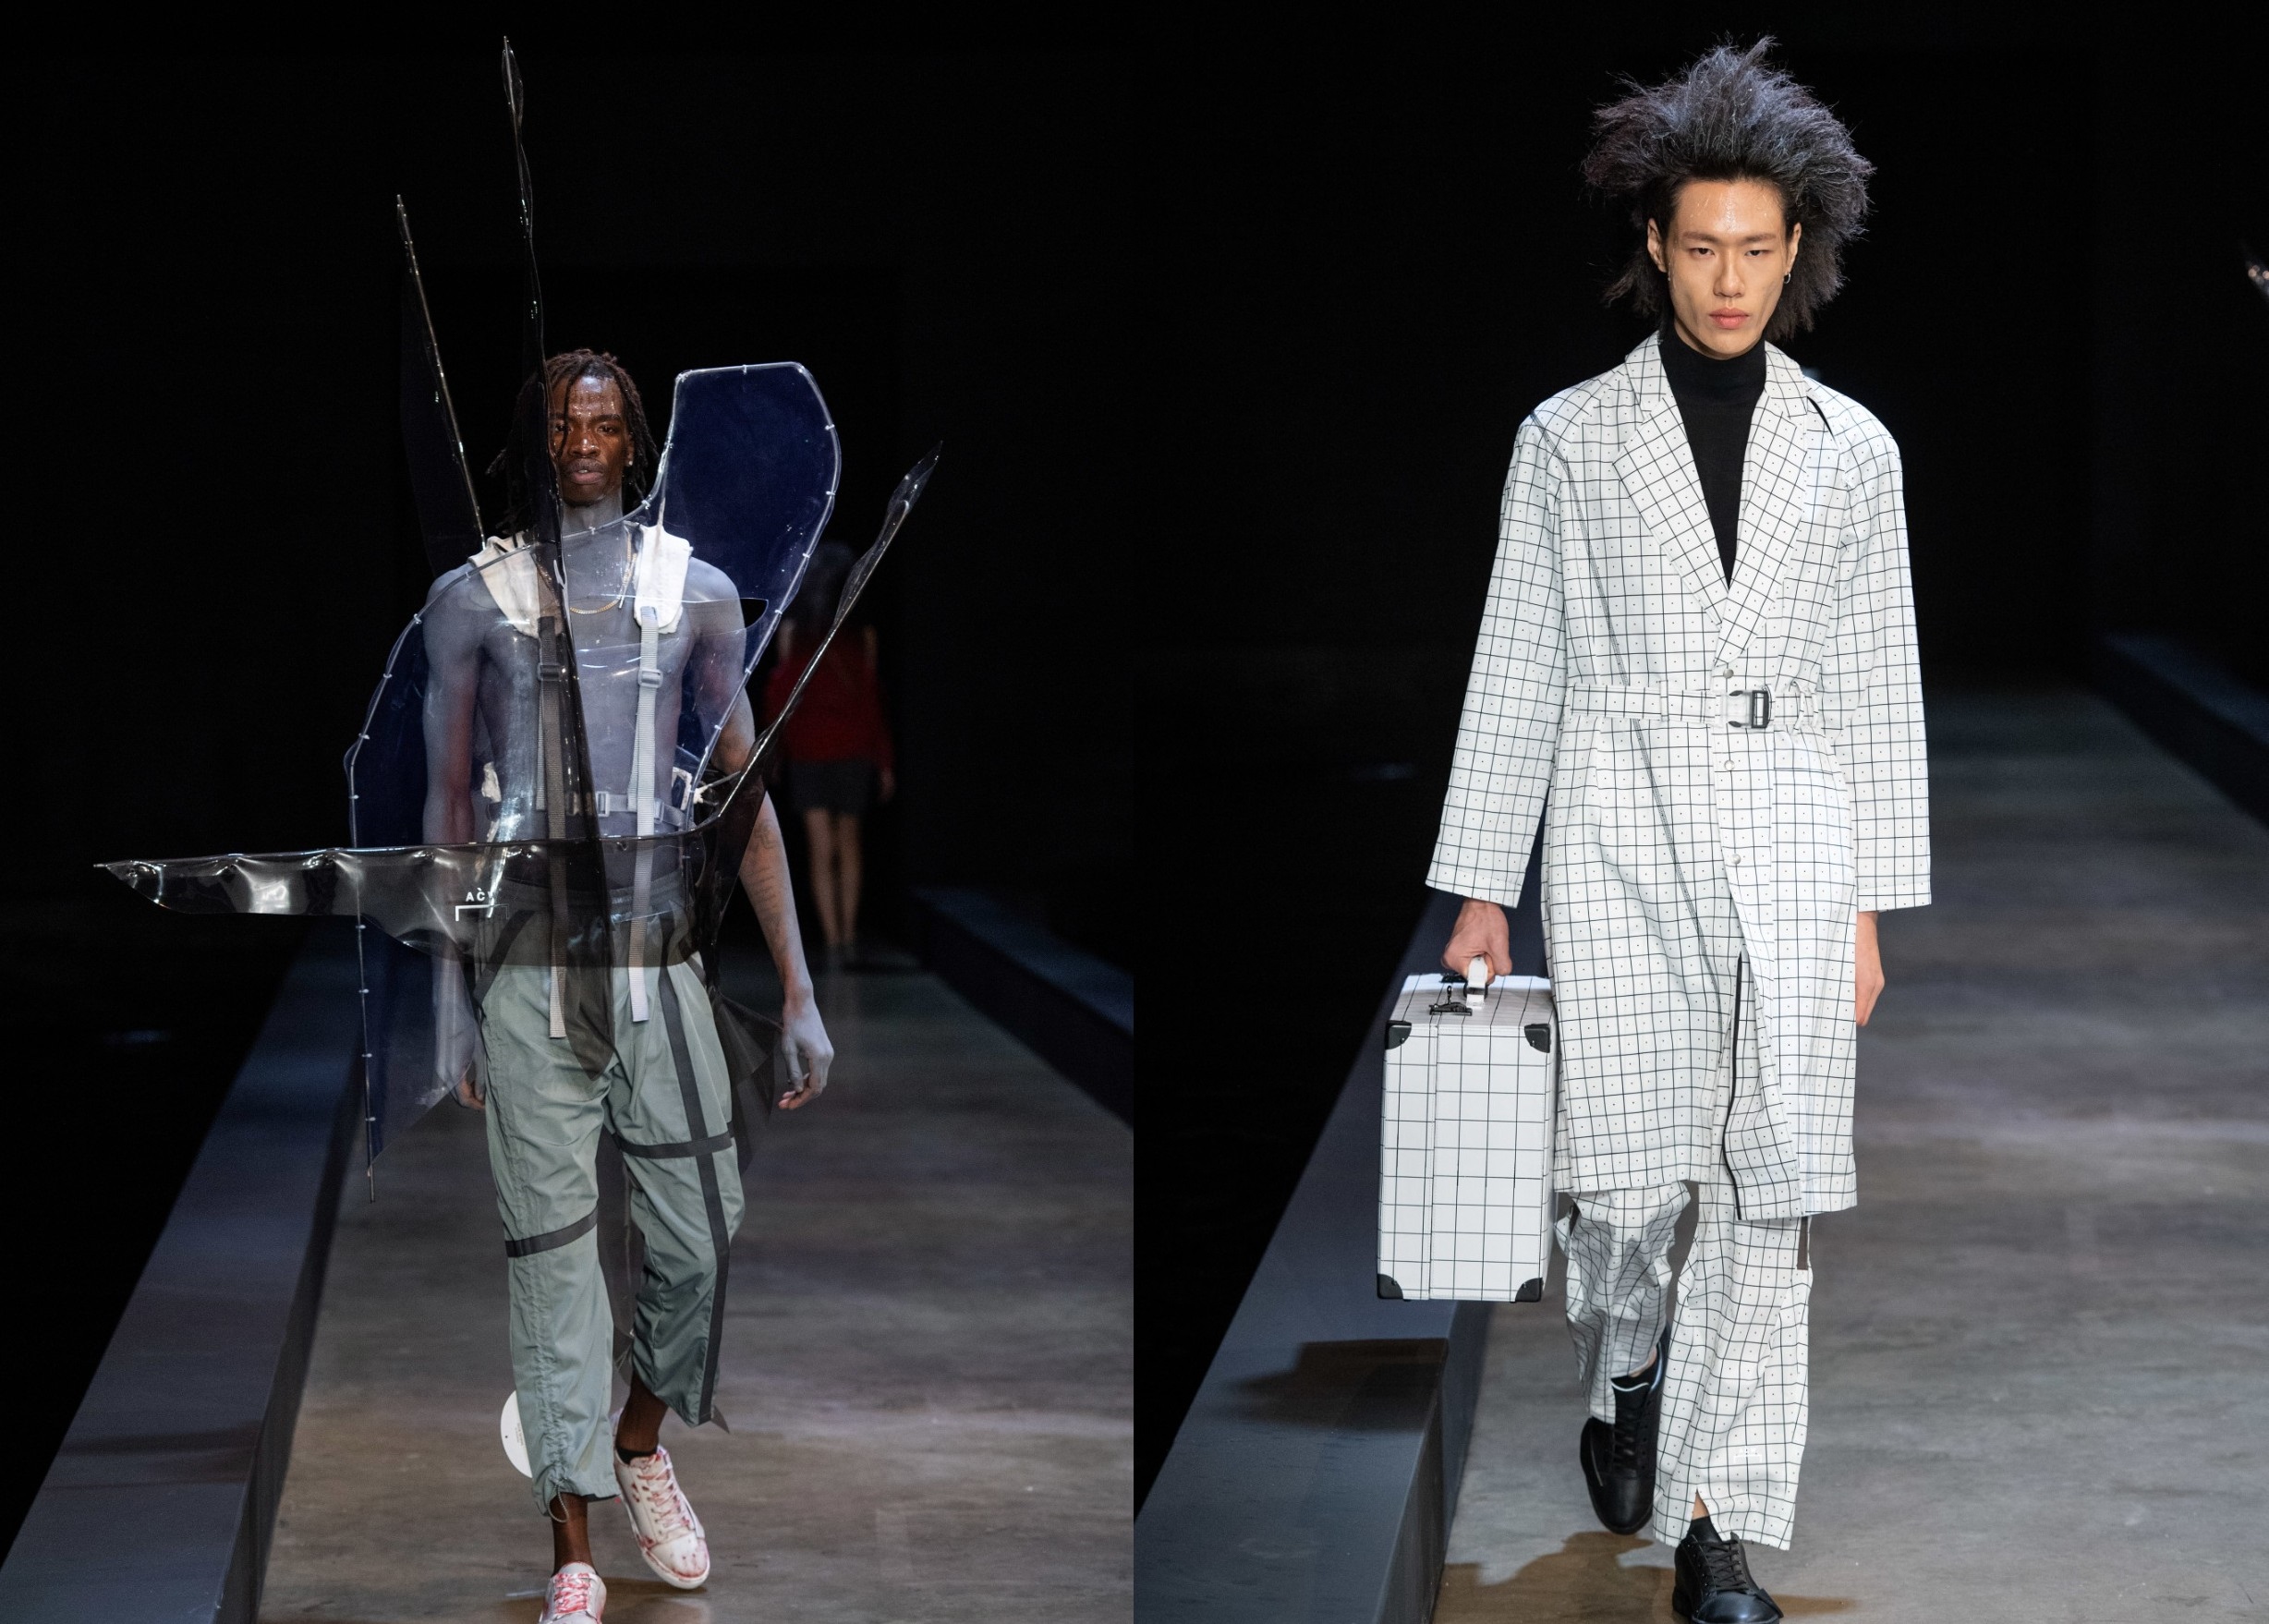 LFWM: A-COLD-WALL* Autumn/Winter 2019 Collection